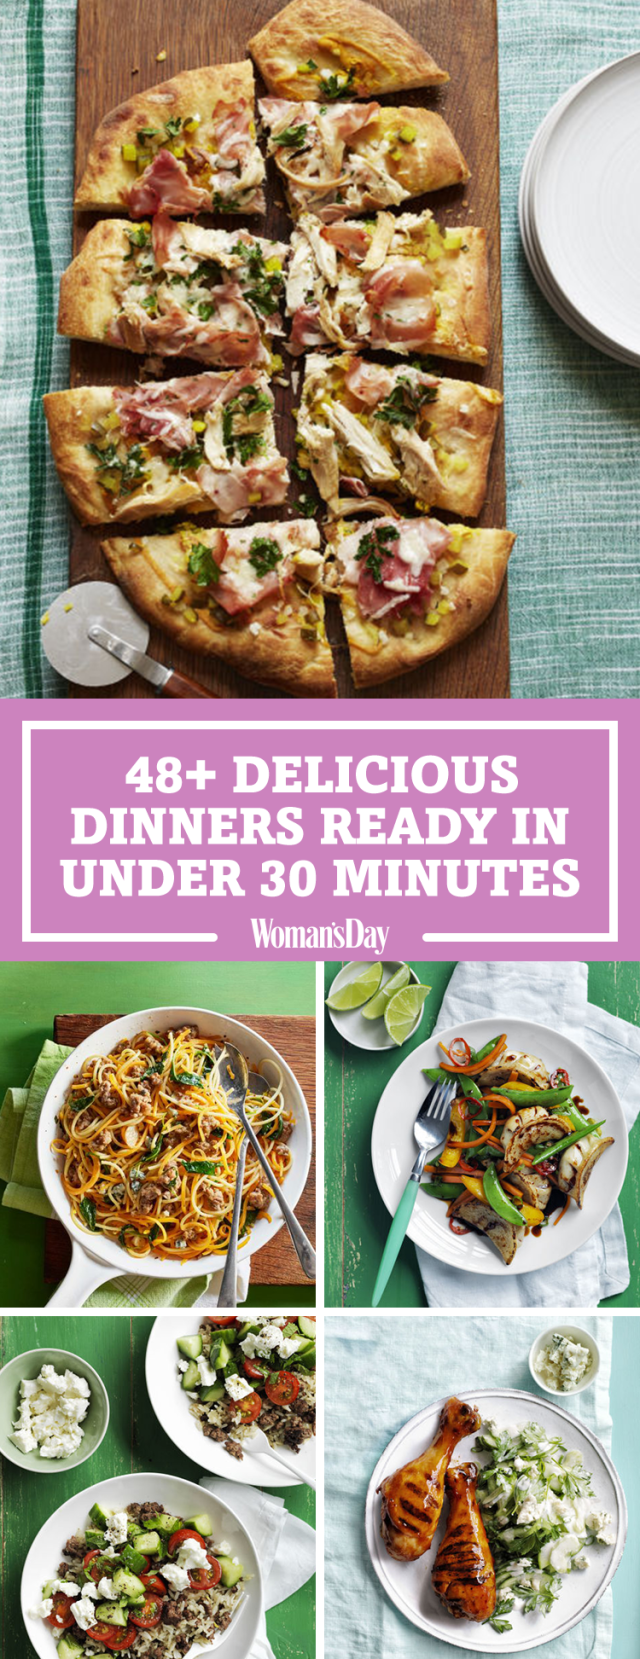 103 Easy 30 Minute Meals - Quick Dinner Recipes